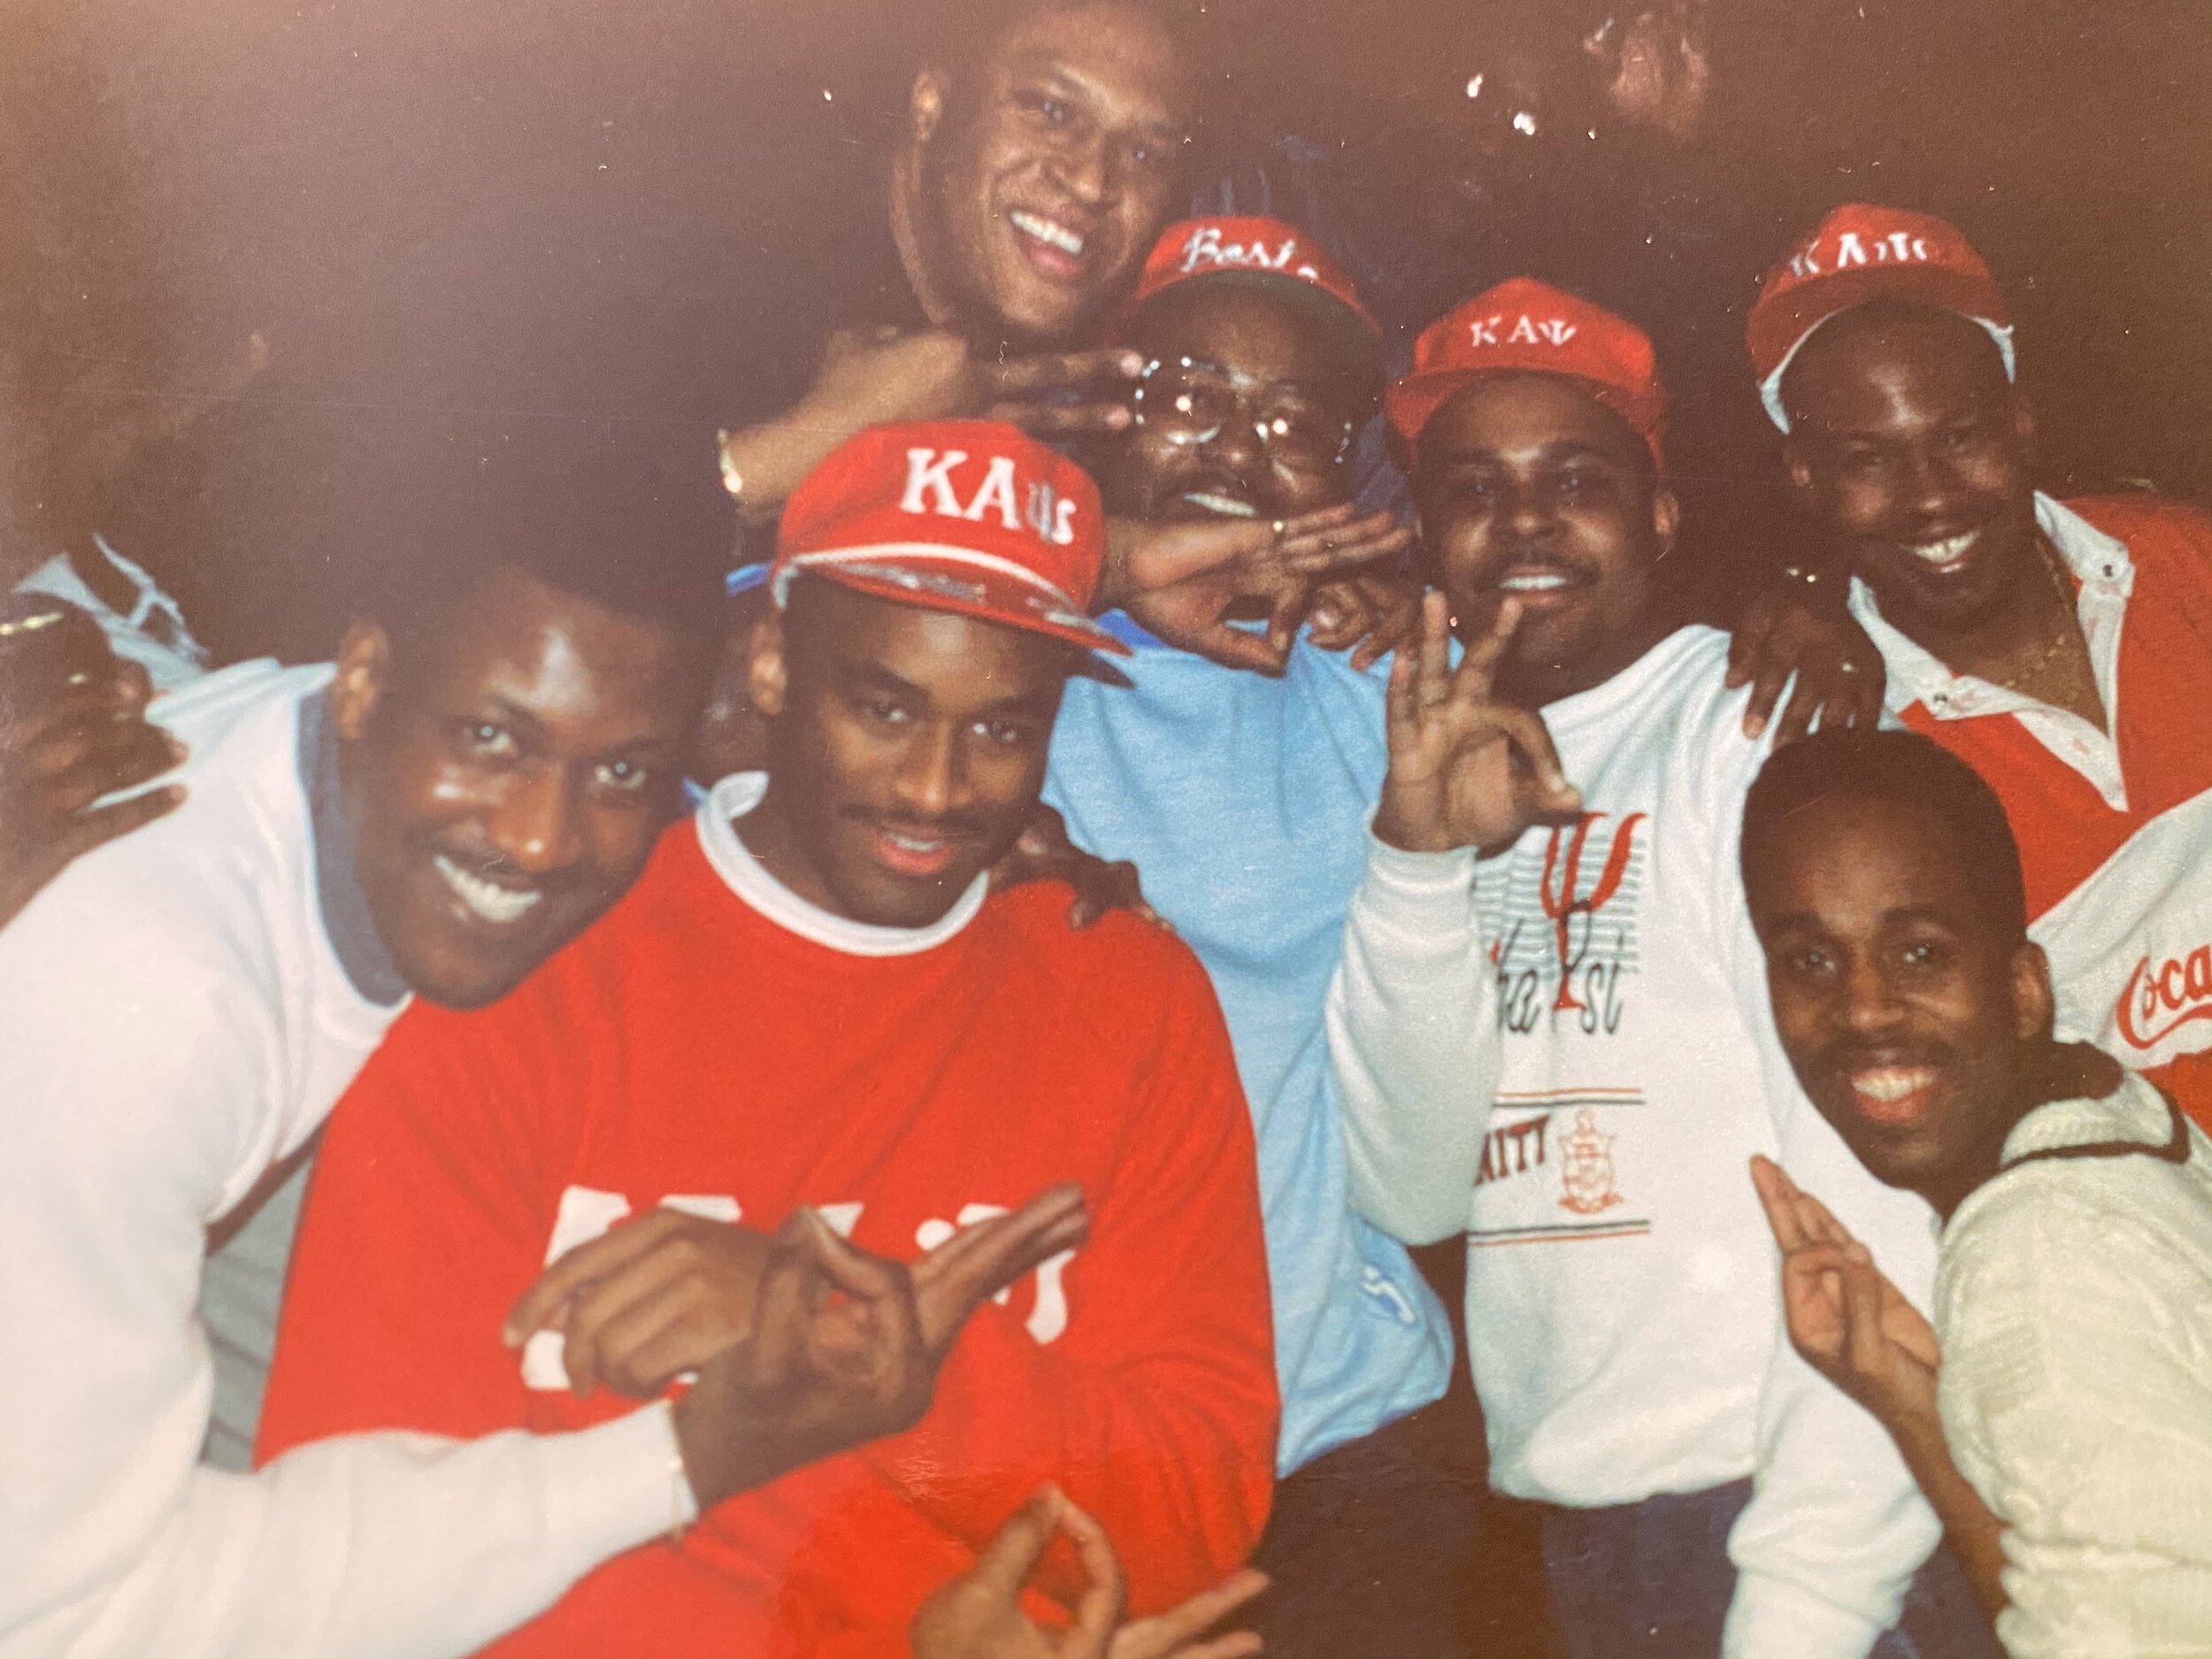 Nupes posing for a photo